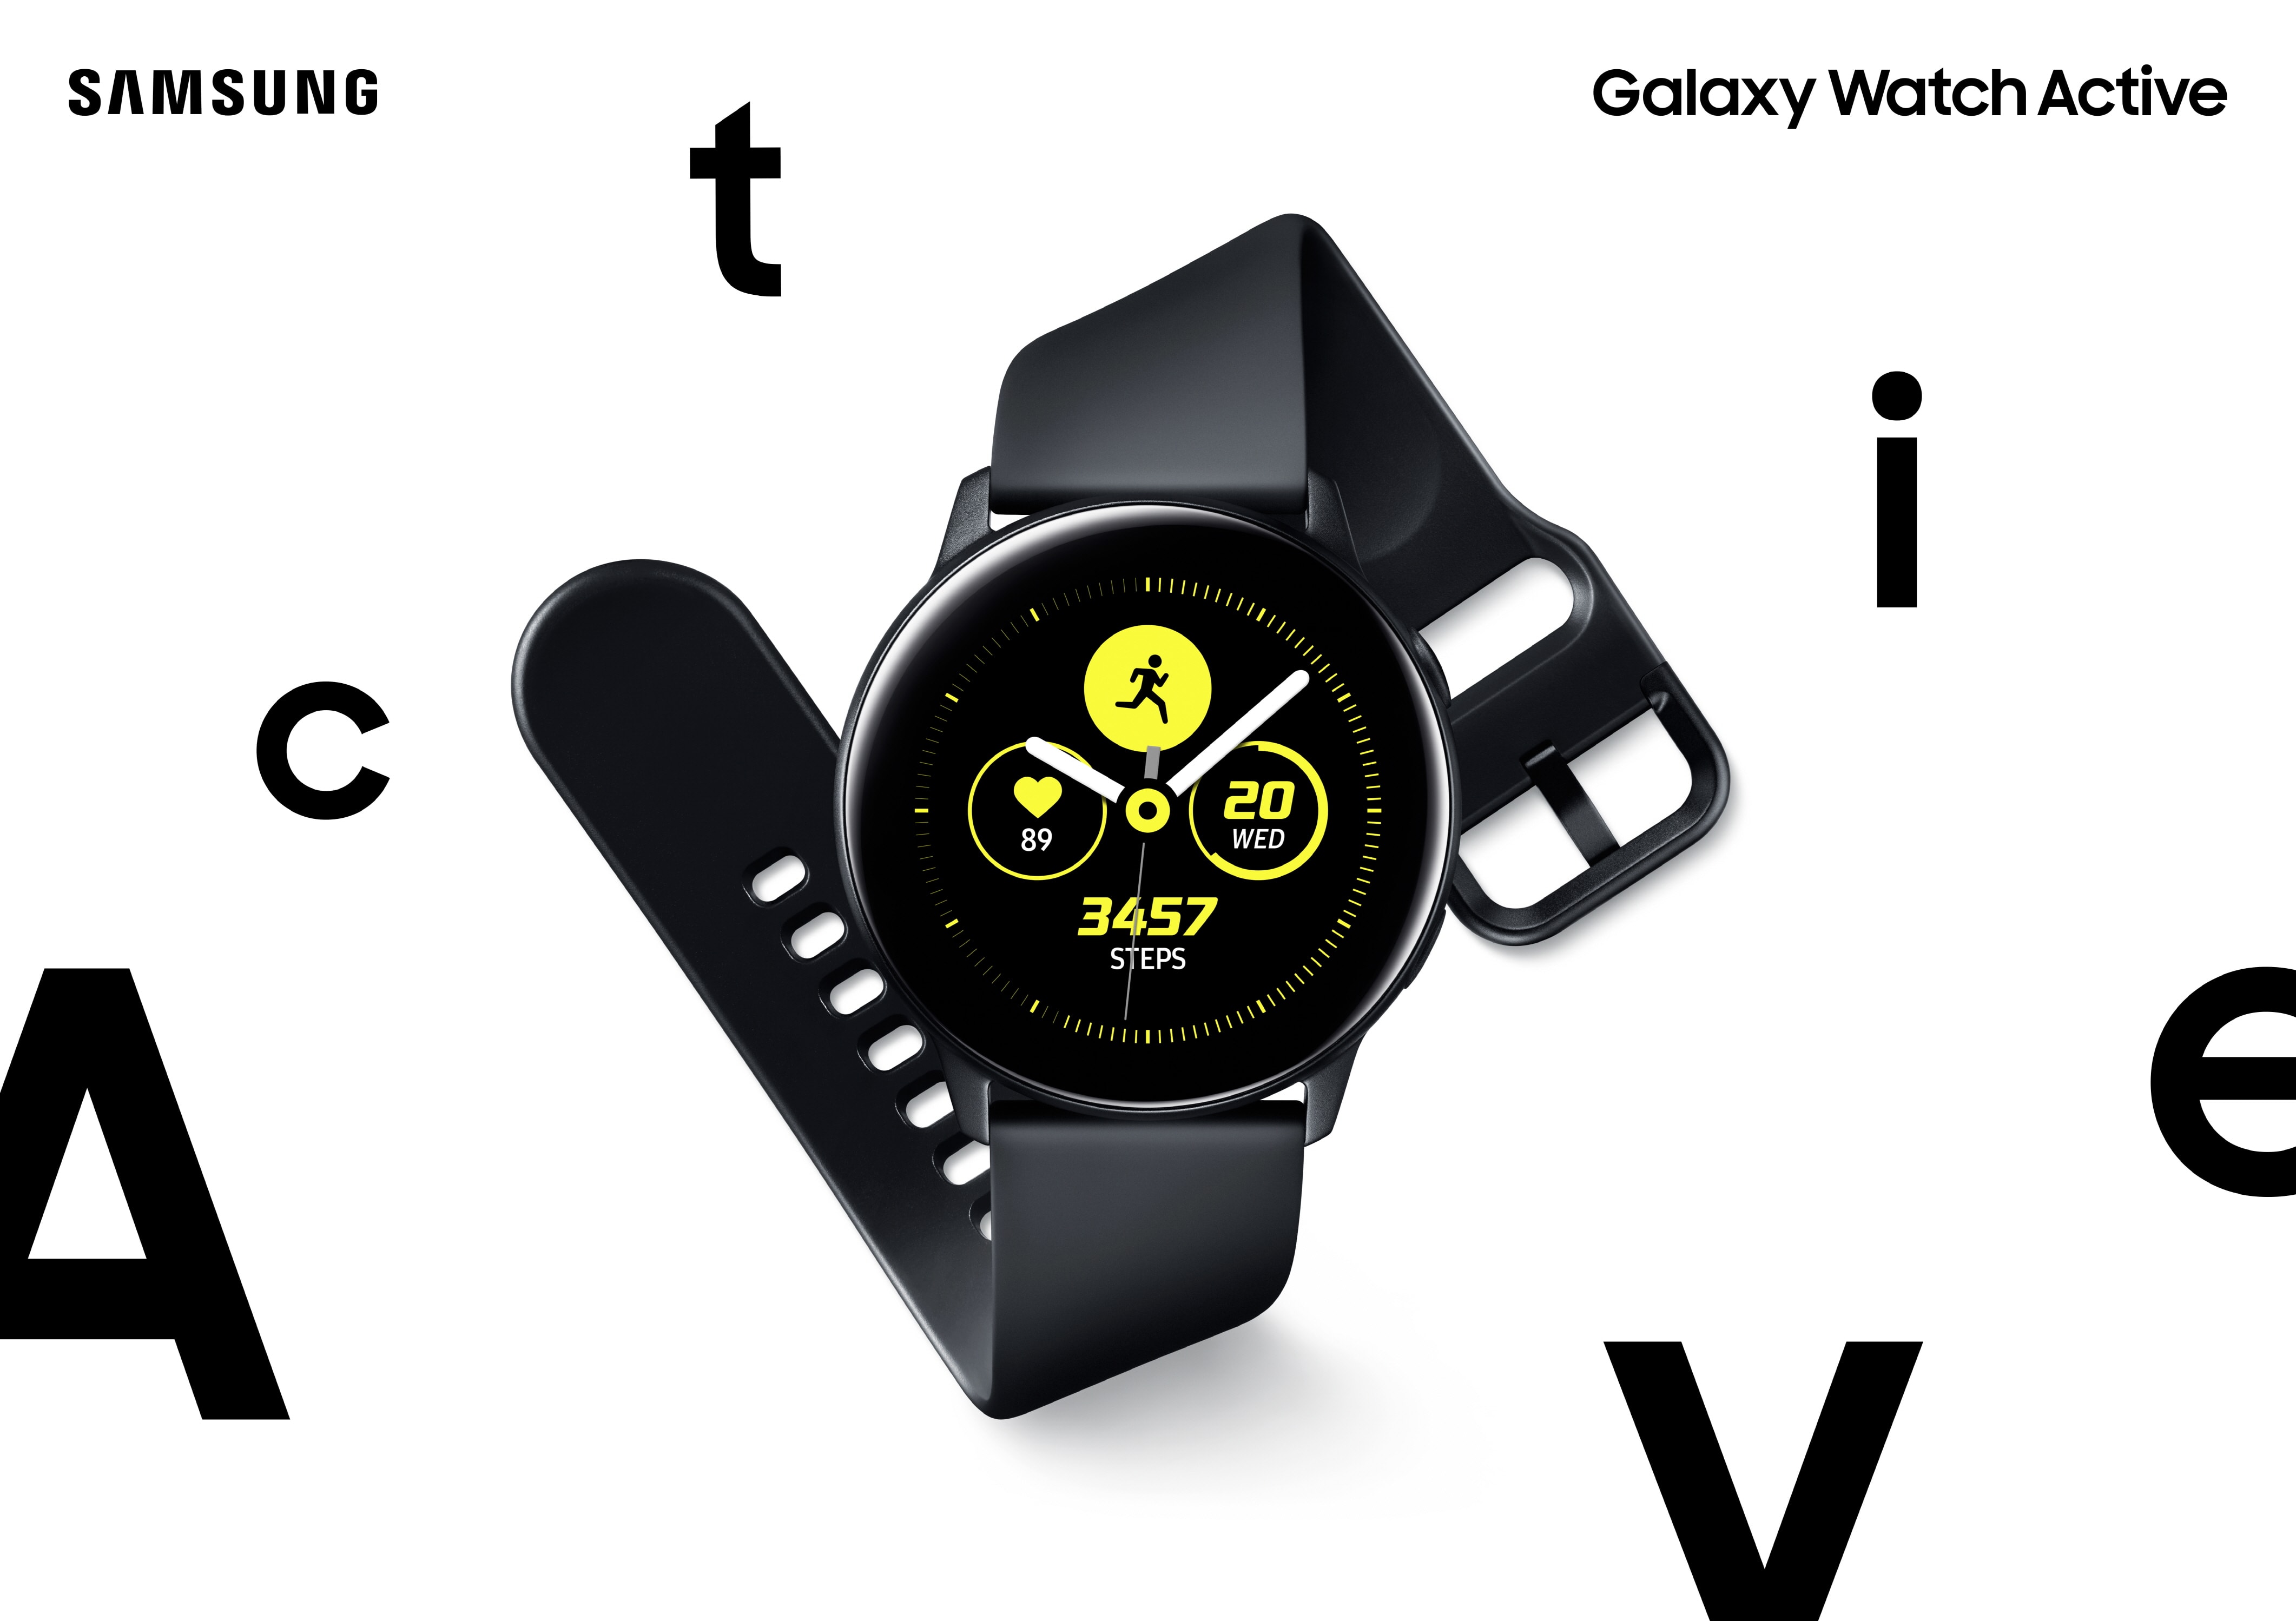 The new Samsung Galaxy Watch Active wants to challenge Apple Watch to a fitness smackdown.